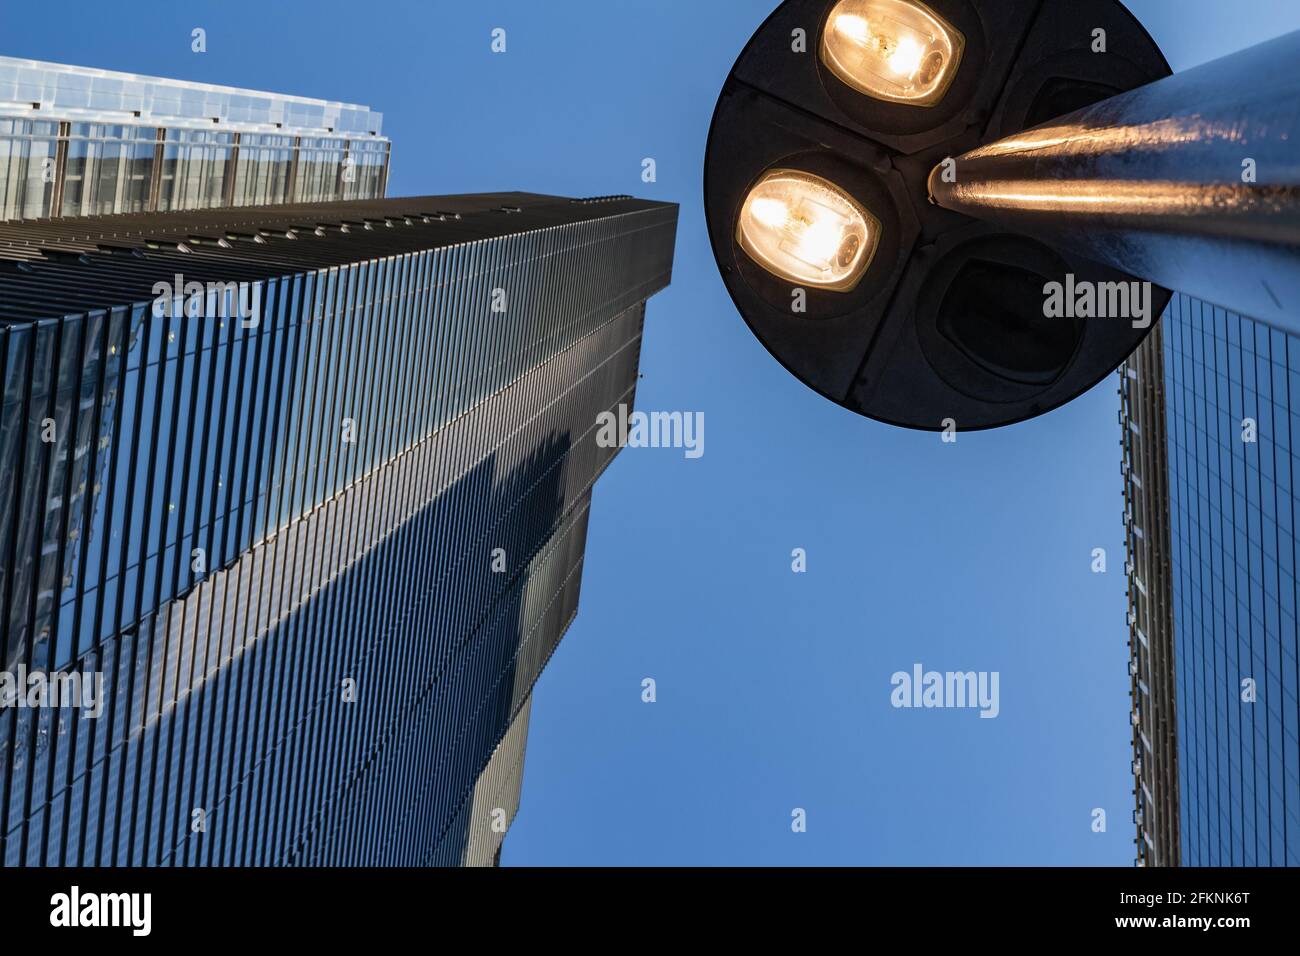 Windows of skyscraper business office building with street lamp at front, Corporate buildings in city. Stock Photo